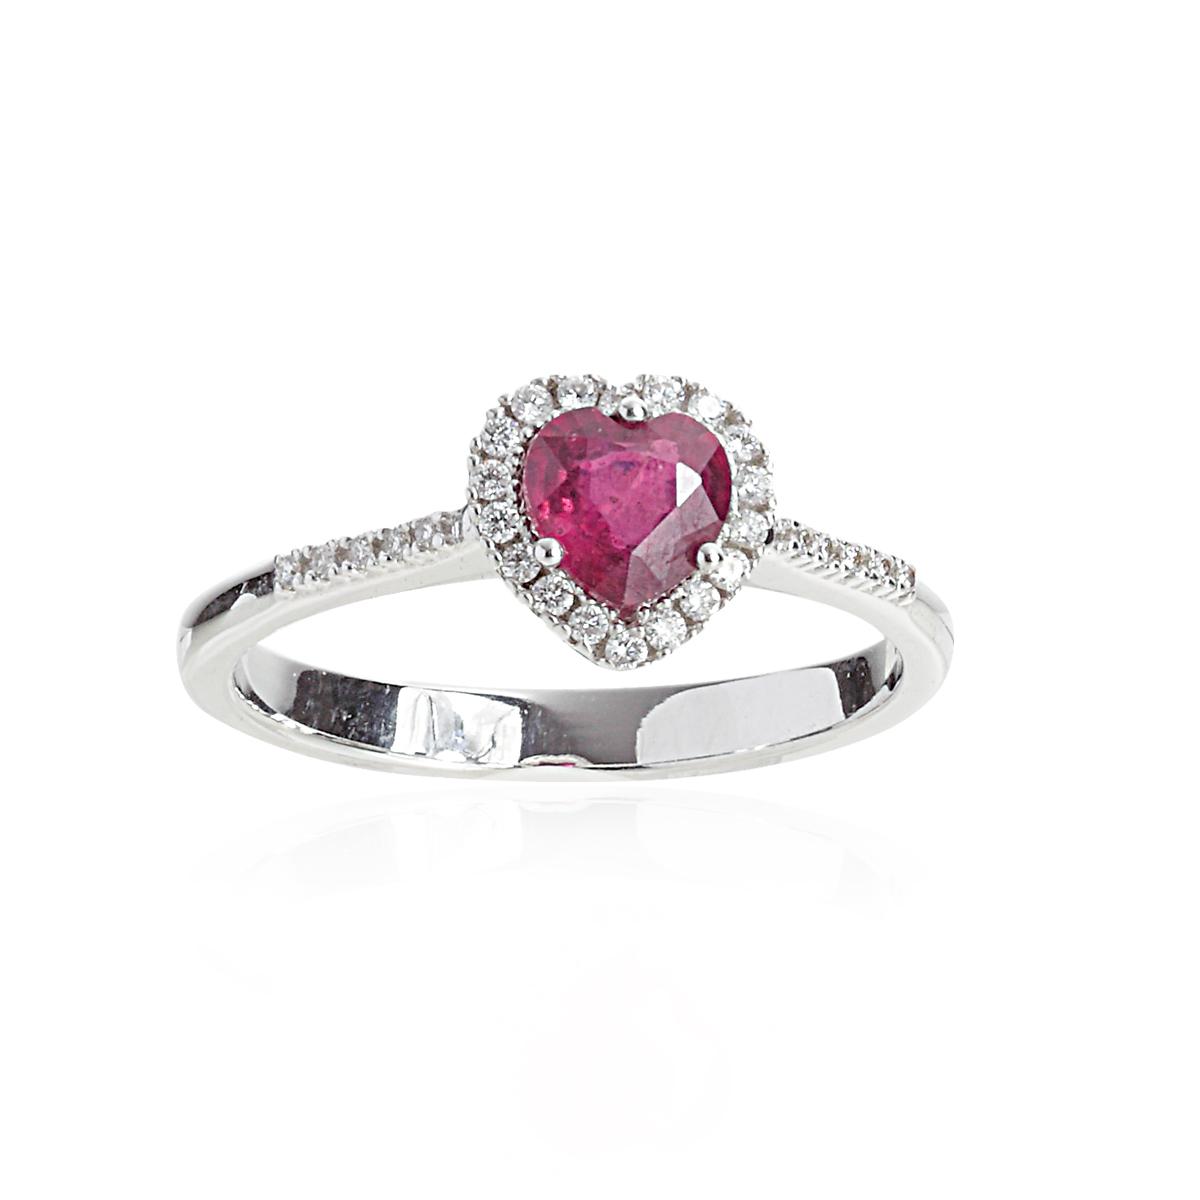 18kt white gold ring with diamonds and heart cut precious stone - AD795